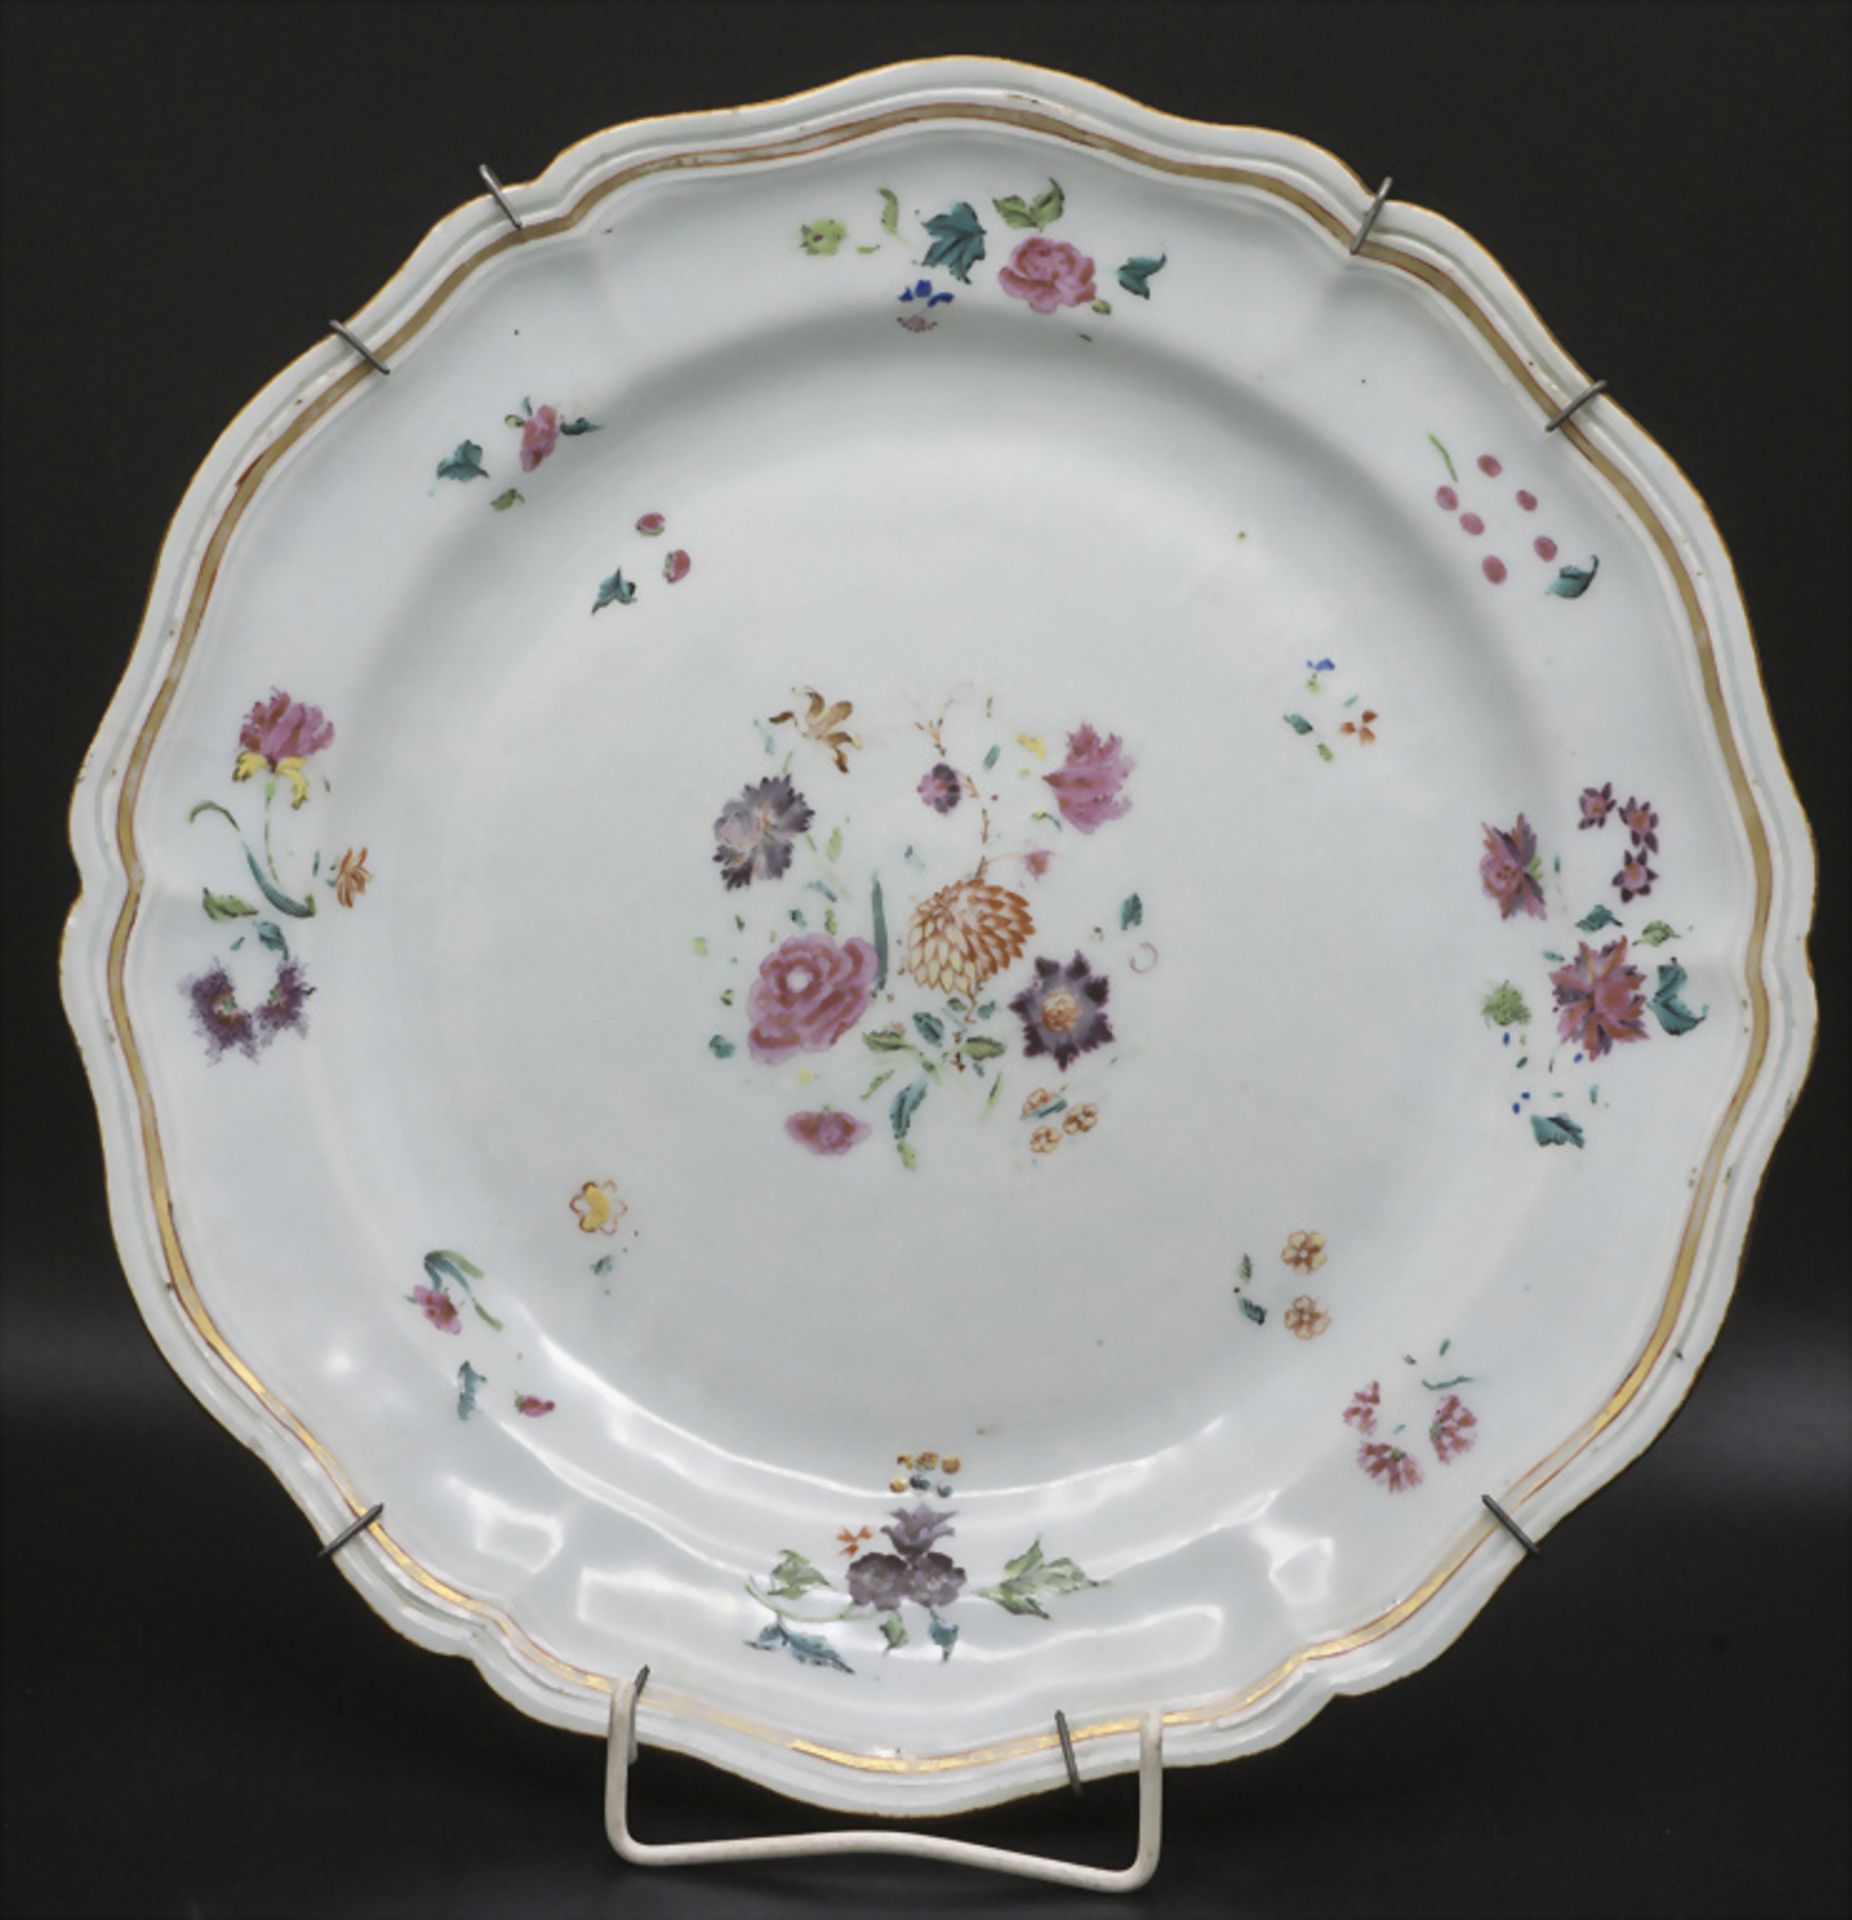 Teller / A porcelain plate, China, Qing-Dynastie (1644-1911), K'ang-hsi Periode (1662-1722)